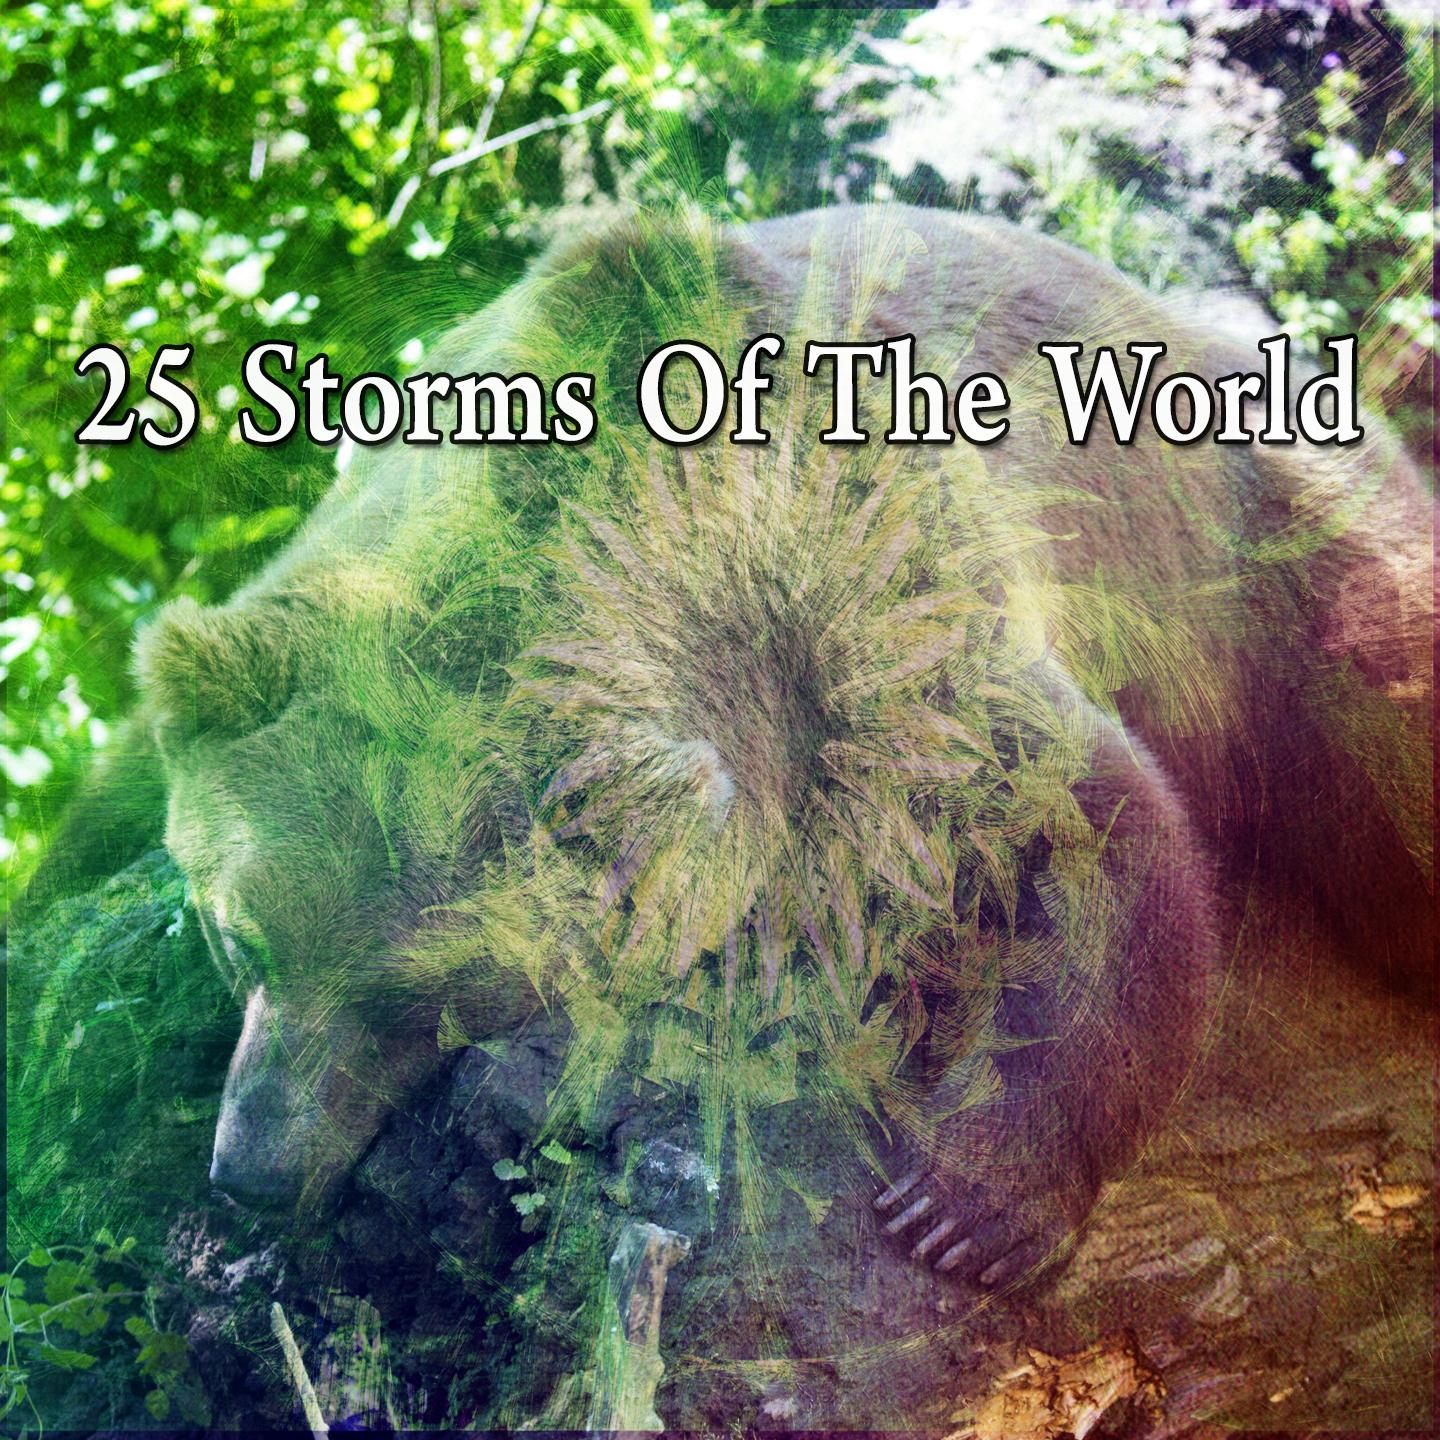 25 Storms Of The World